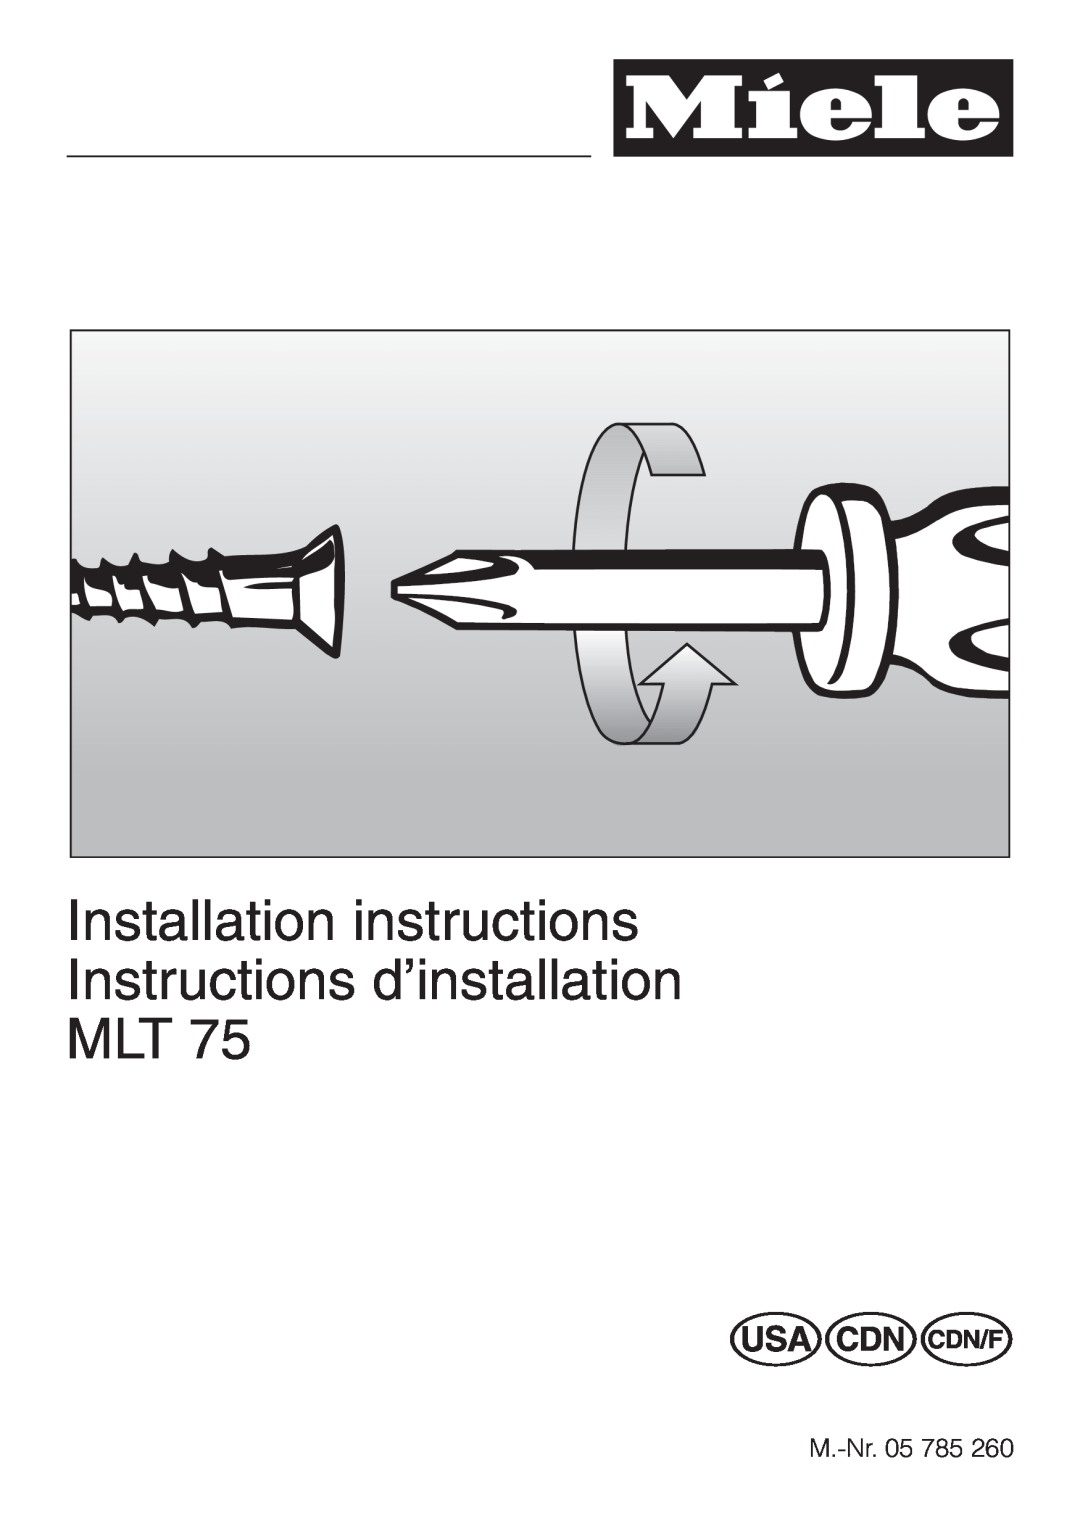 Miele MLT 75 installation instructions Installation instructions, Instructions d’installation MLT 